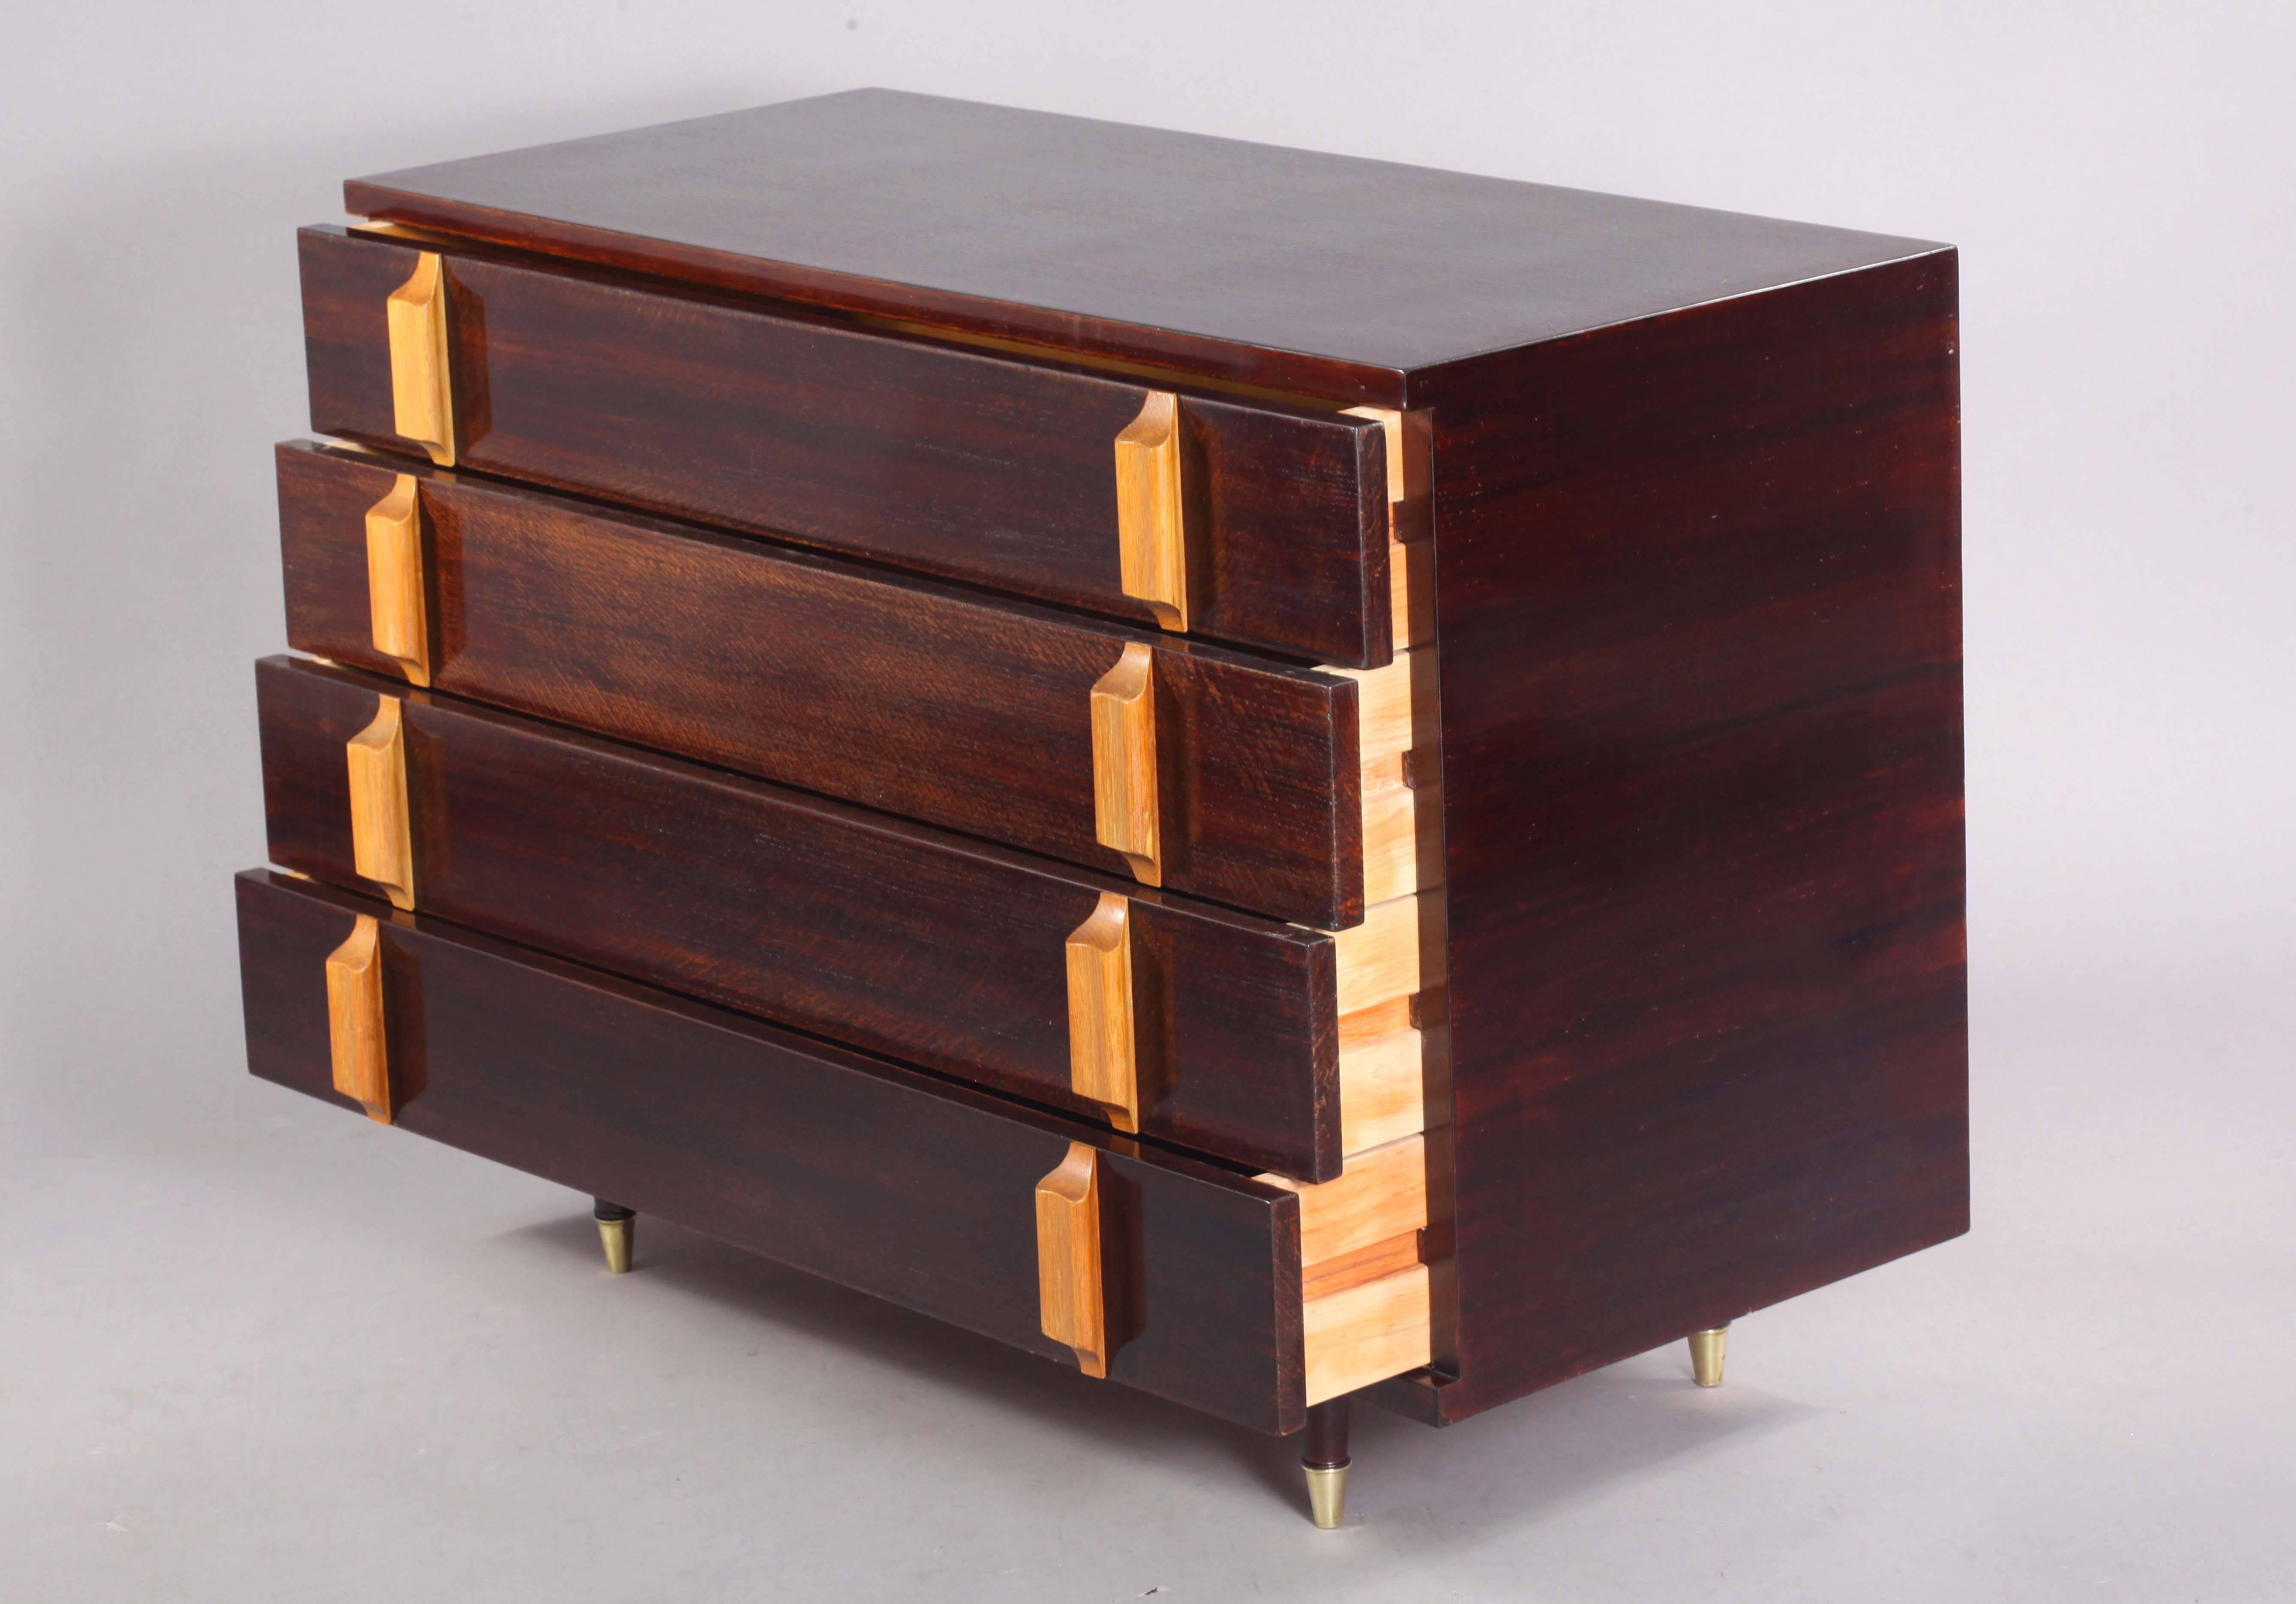 Chest of drawer,
Italy, 1950
dark walnut
two colors, four drawers, brass shoes.